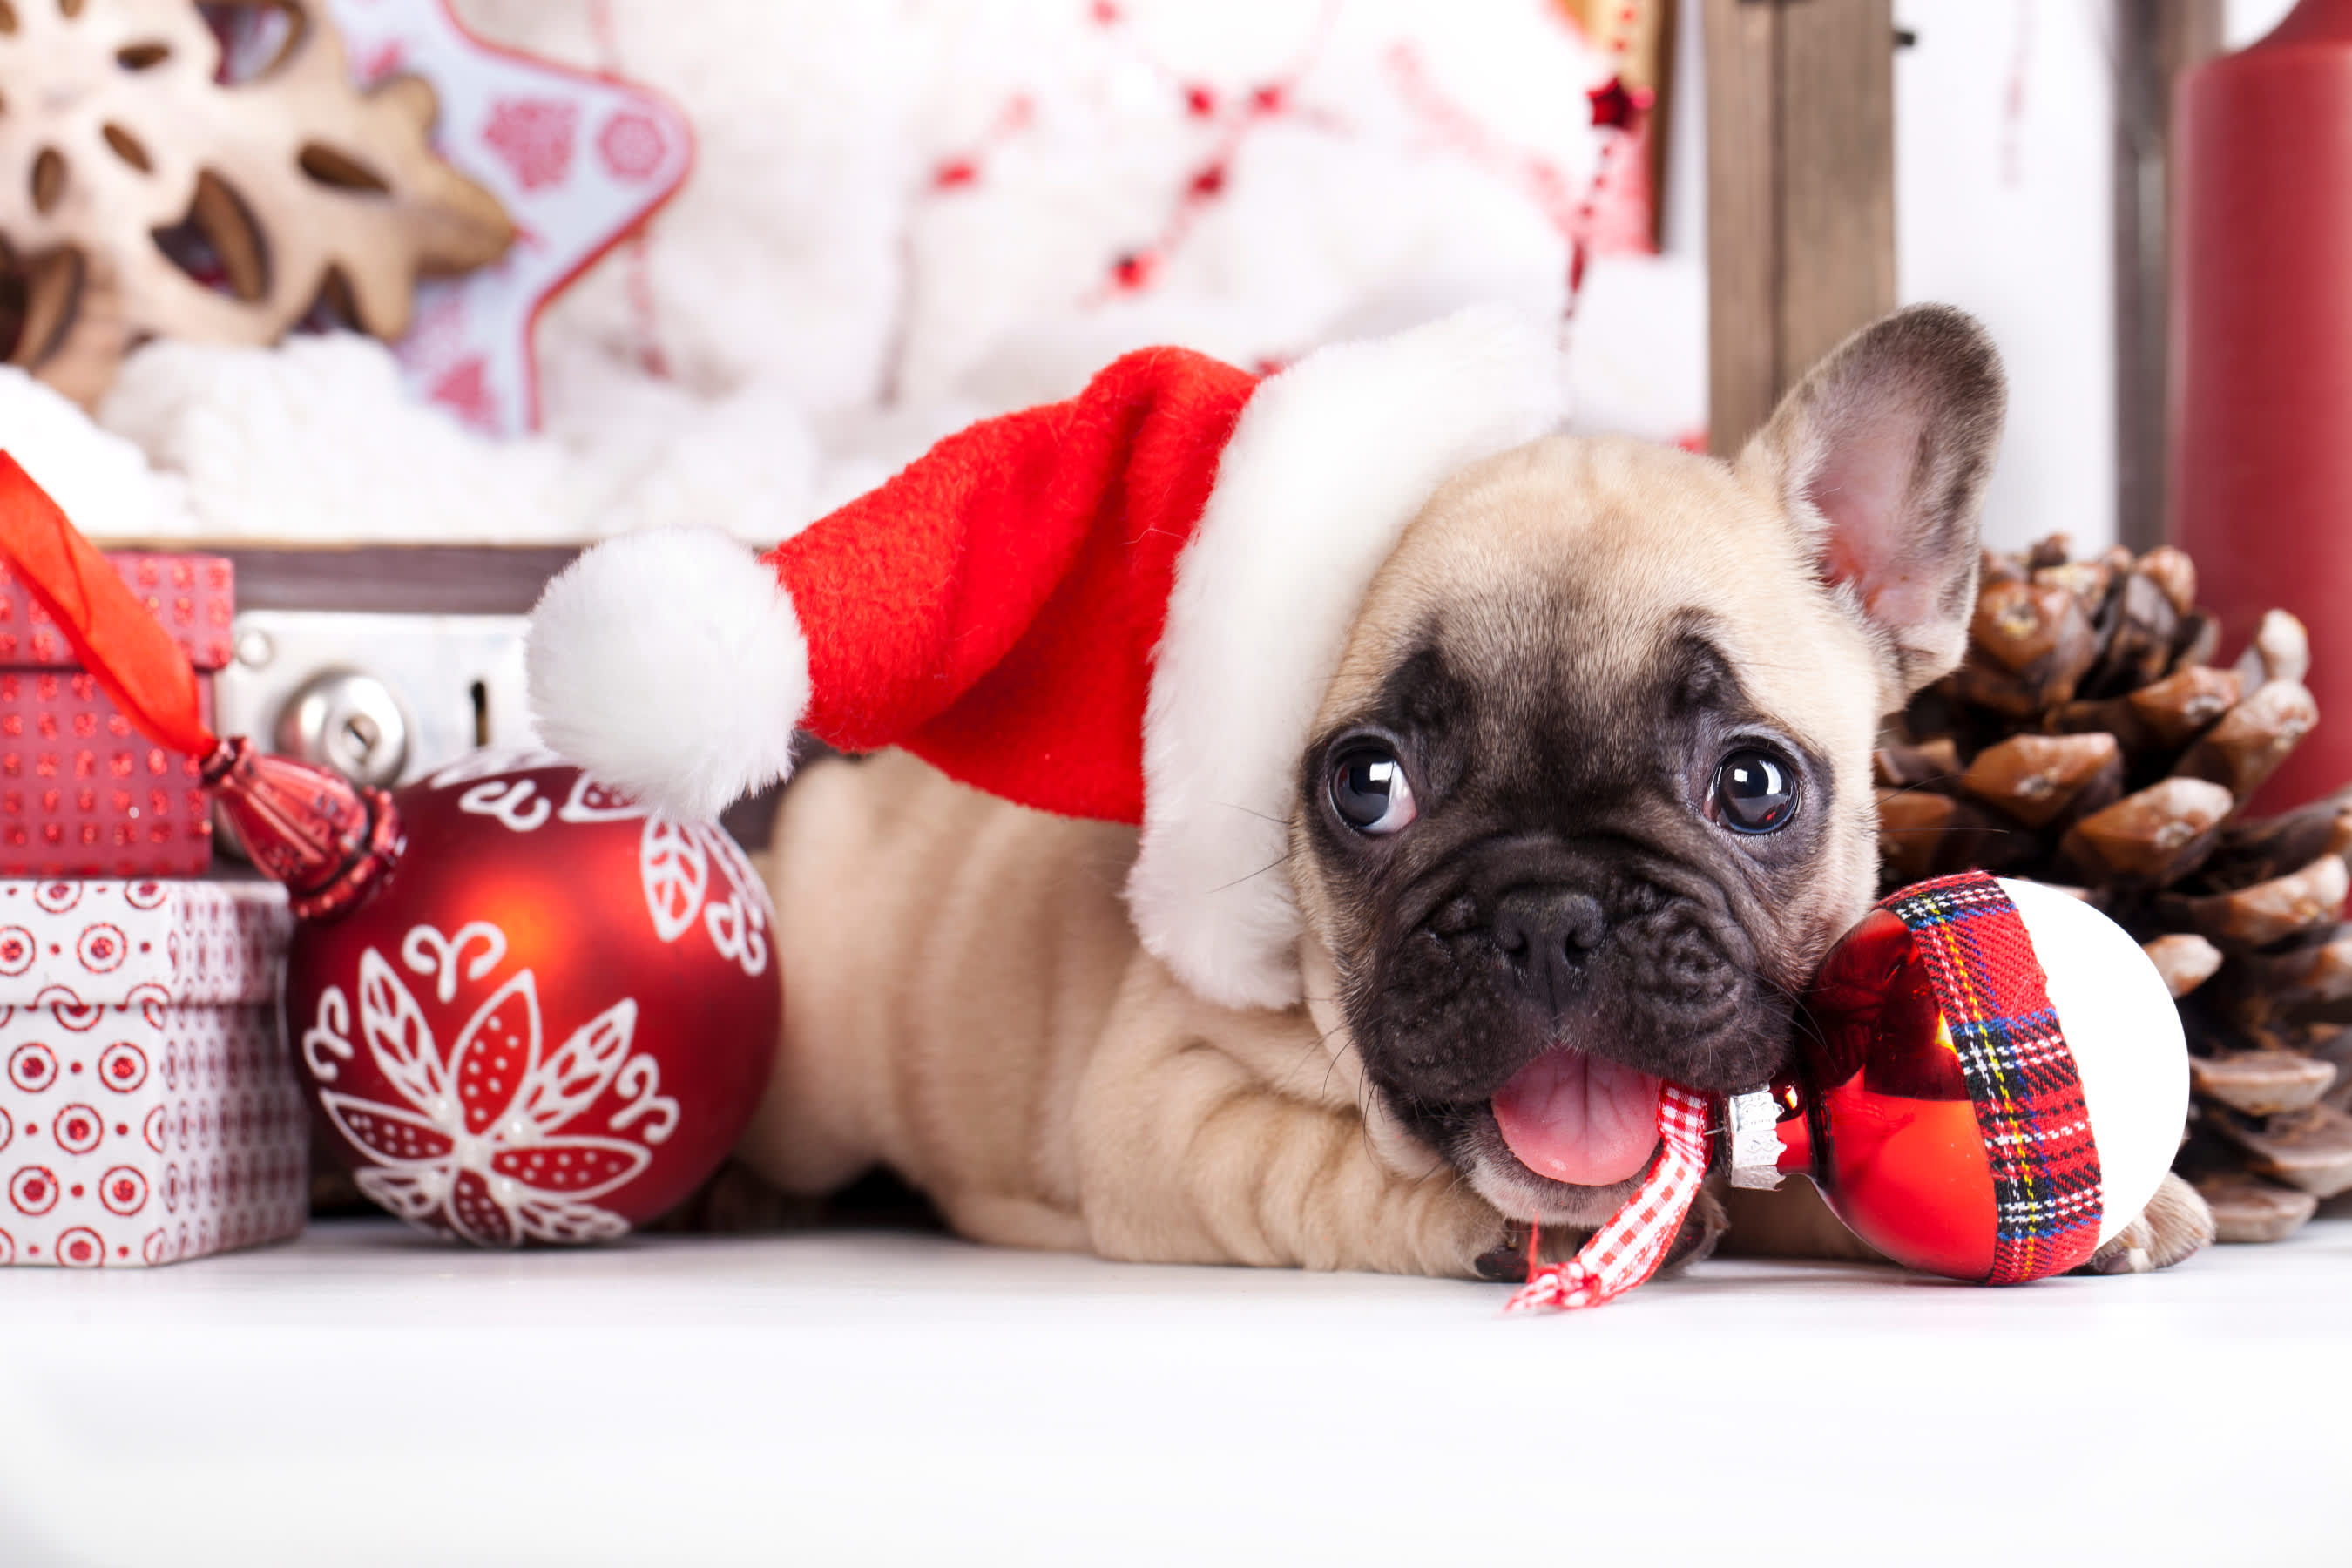 13 Fun & Useful Holiday Gifts For Every Type Of Dog Under $25